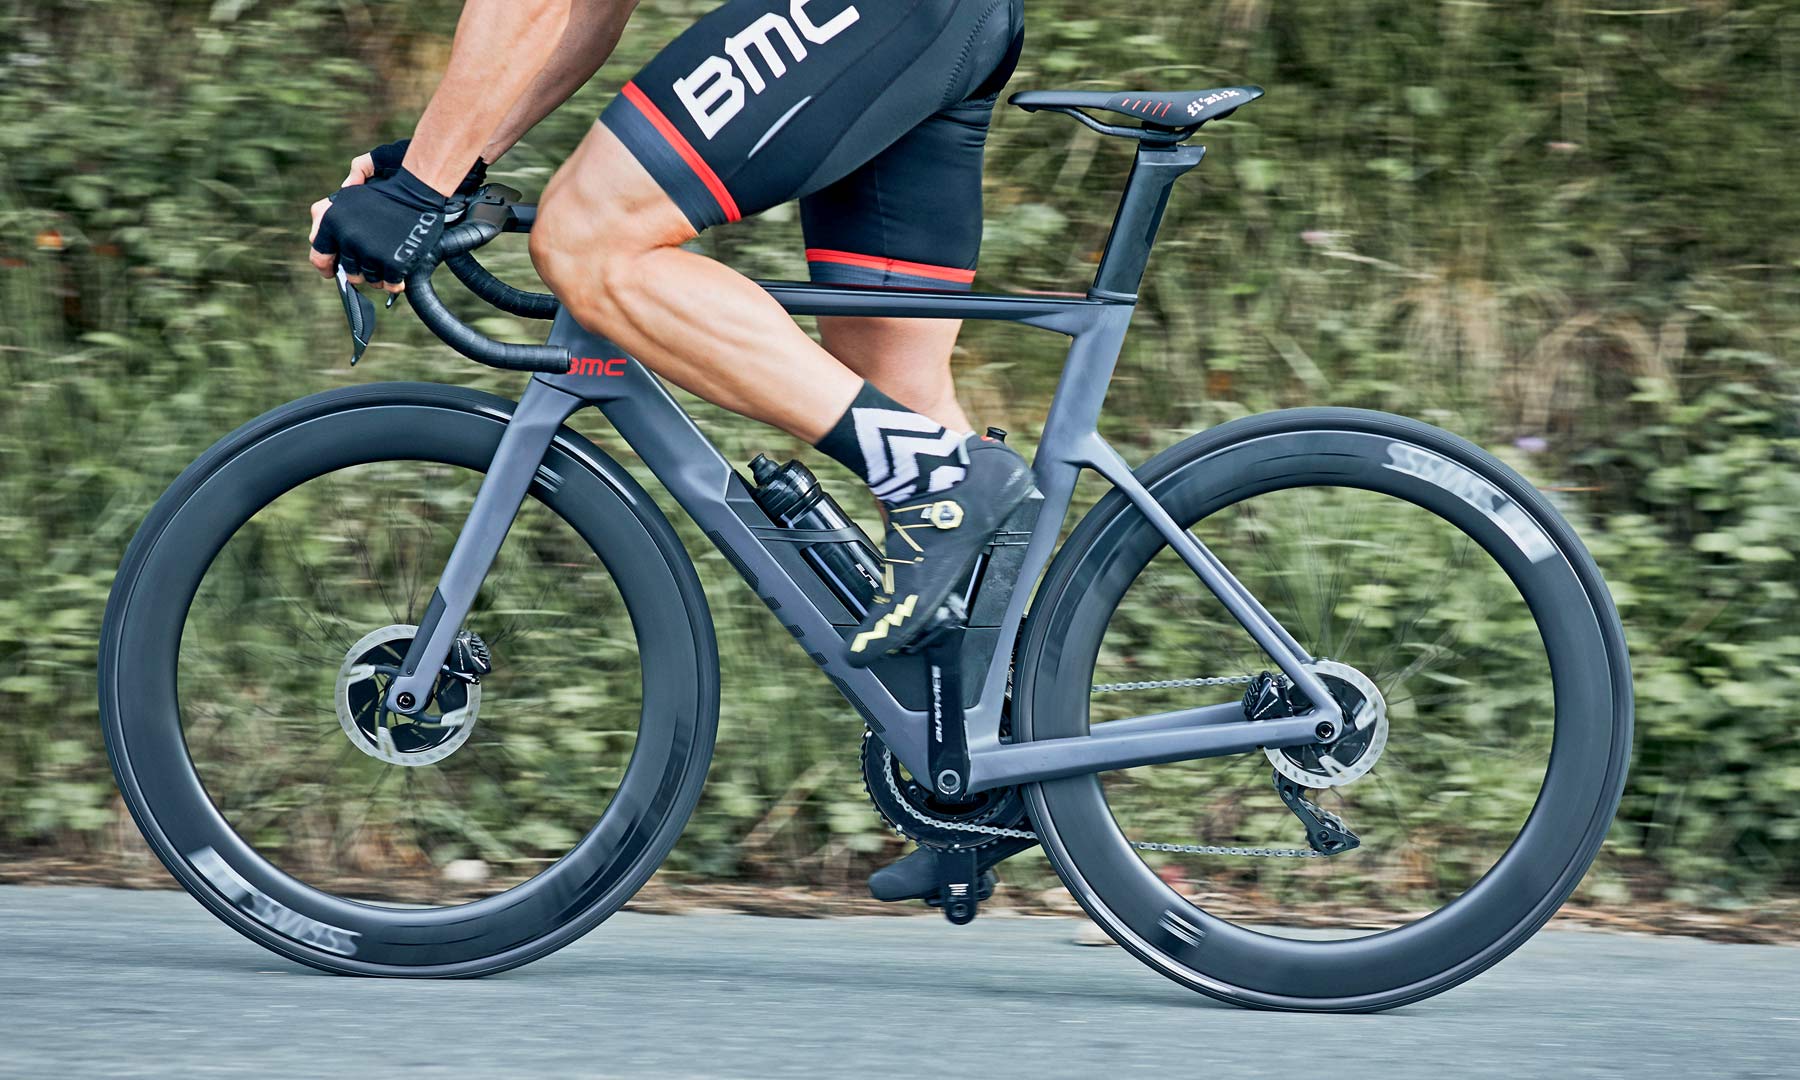 BMC Timemachine Road adds discs, integrated bar, even race hydration in new aero road bike